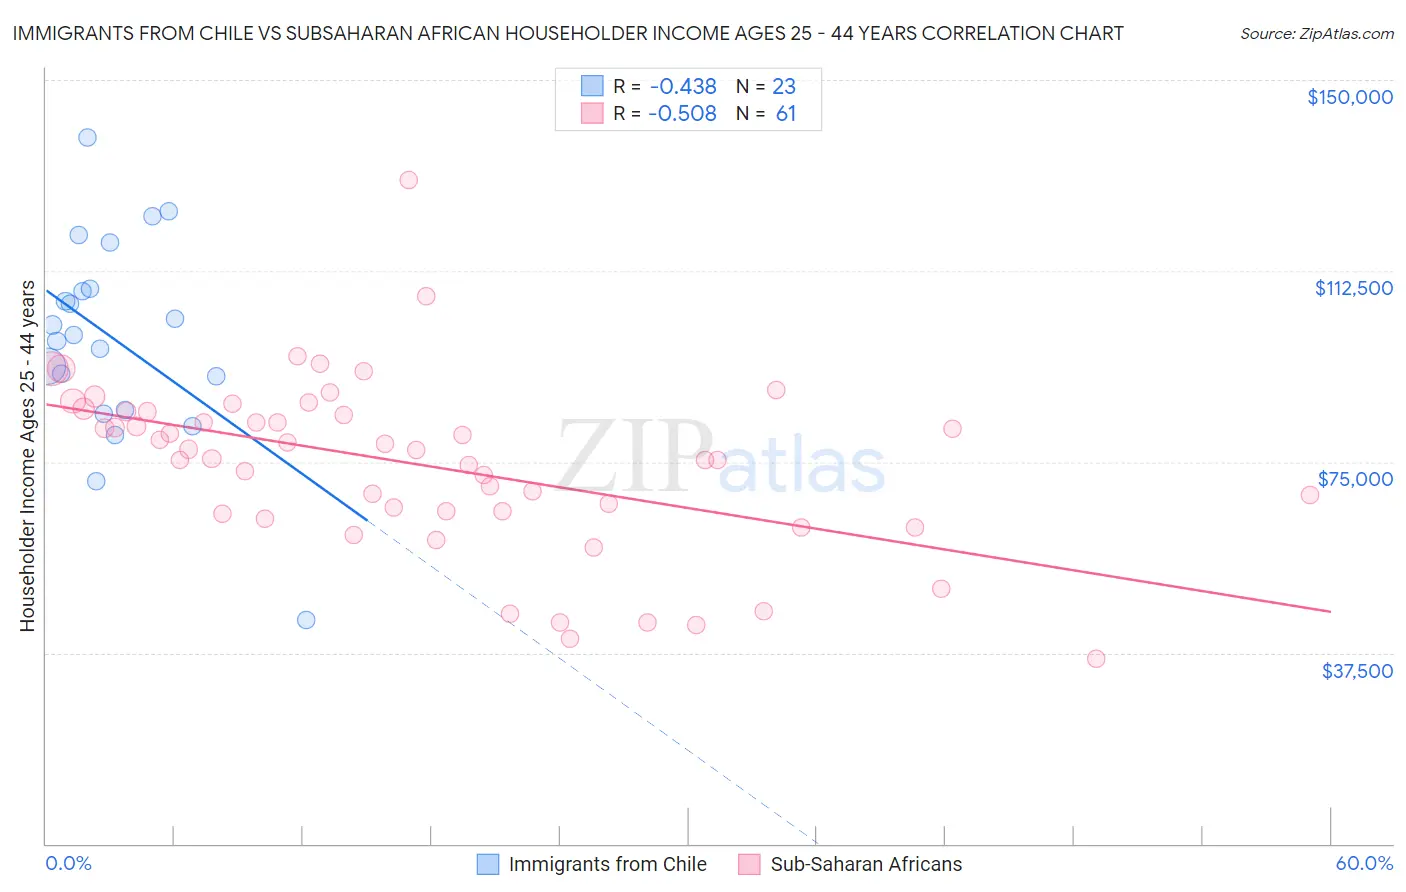 Immigrants from Chile vs Subsaharan African Householder Income Ages 25 - 44 years